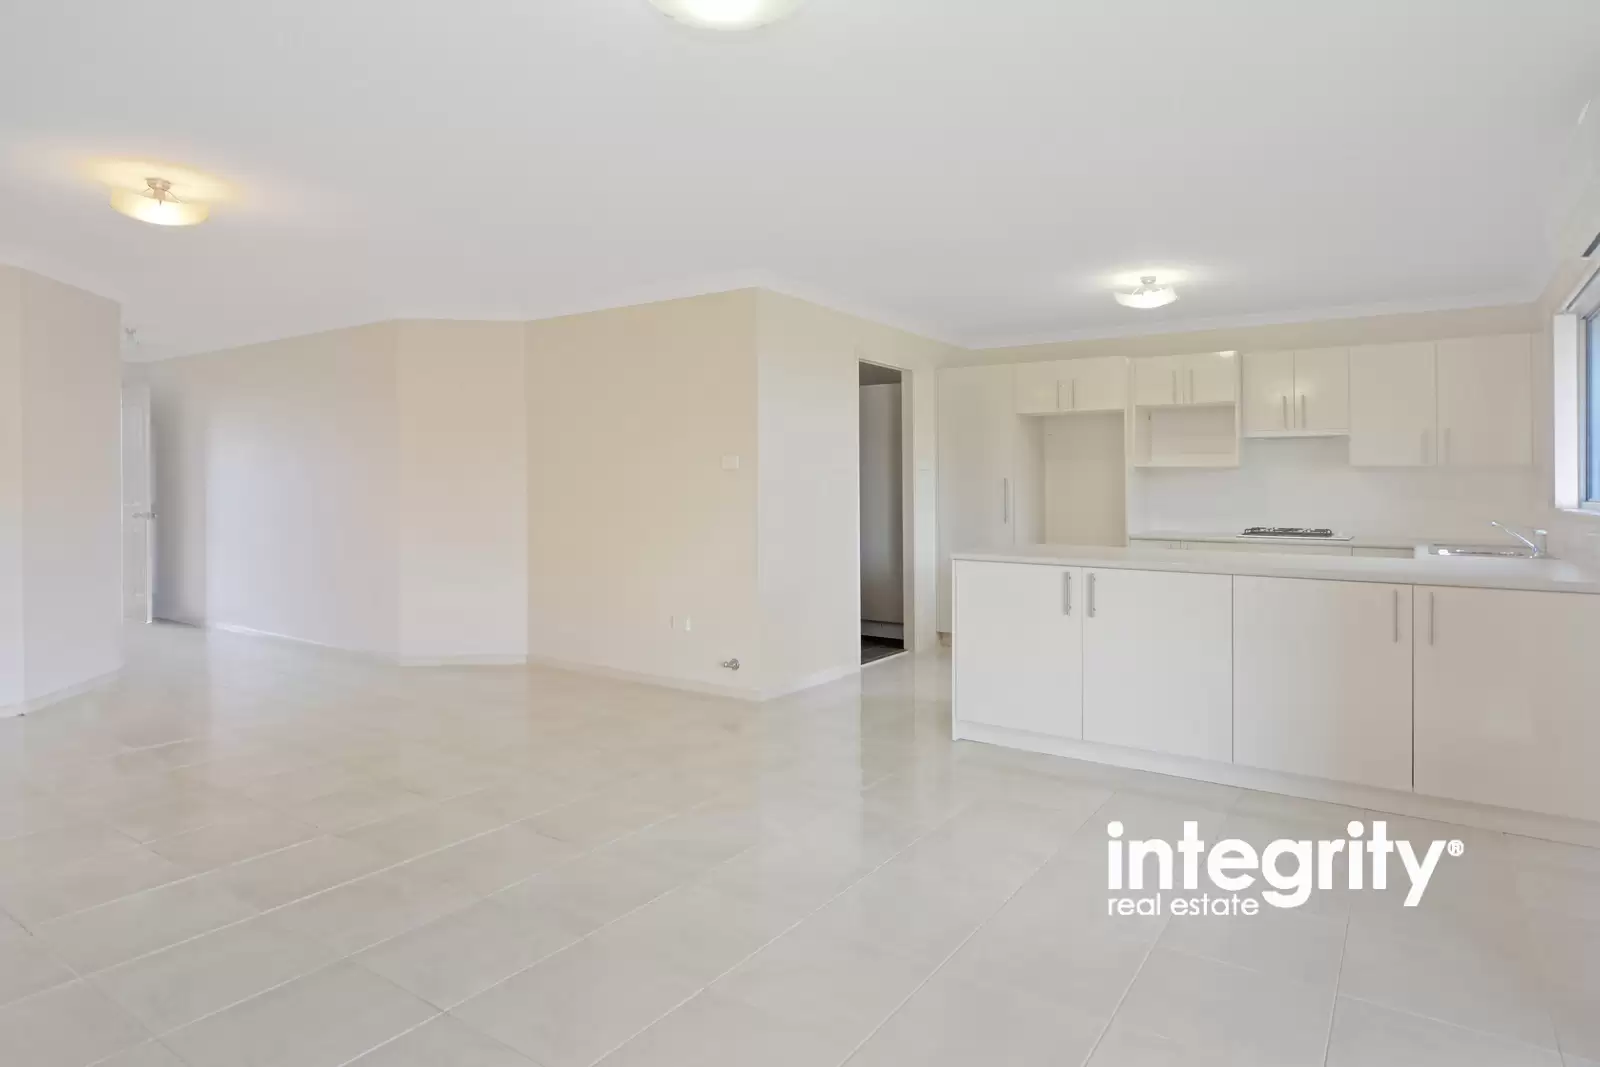 4/13 Hannah Place, Worrigee Sold by Integrity Real Estate - image 3